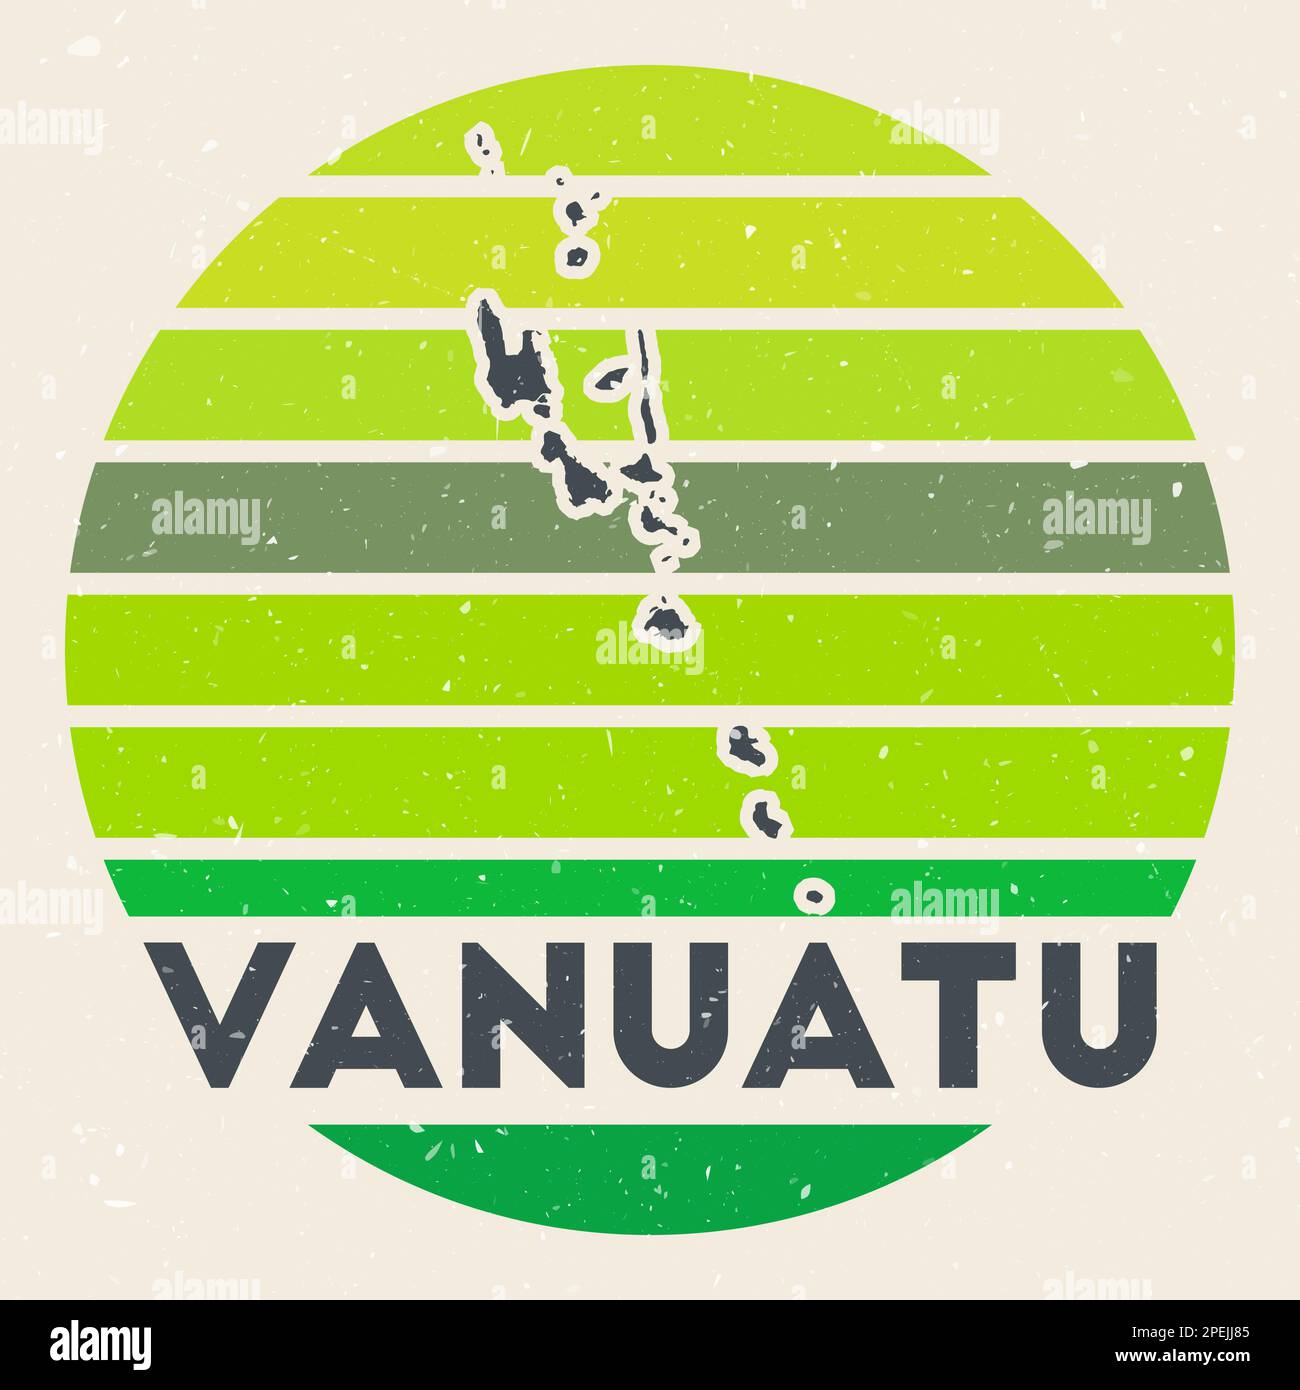 Vanuatu logo. Sign with the map of country and colored stripes, vector illustration. Can be used as insignia, logotype, label, sticker or badge of the Stock Vector